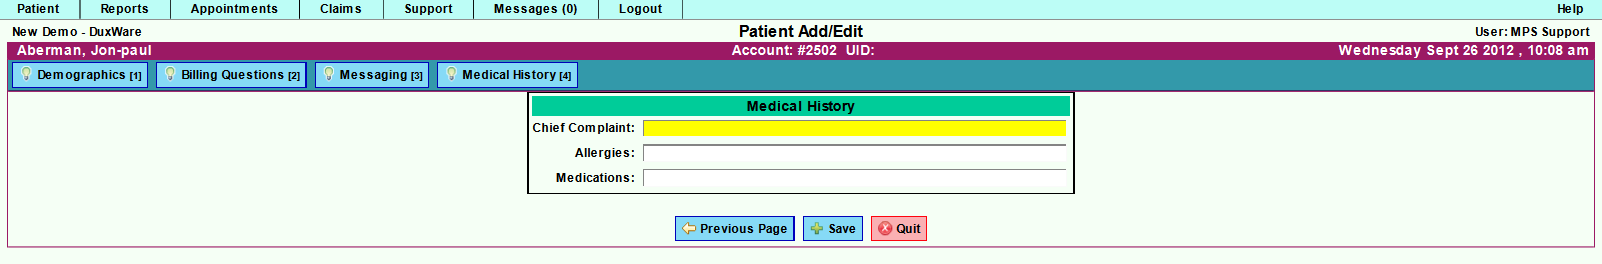 Patient Add Edit - 4th page.png